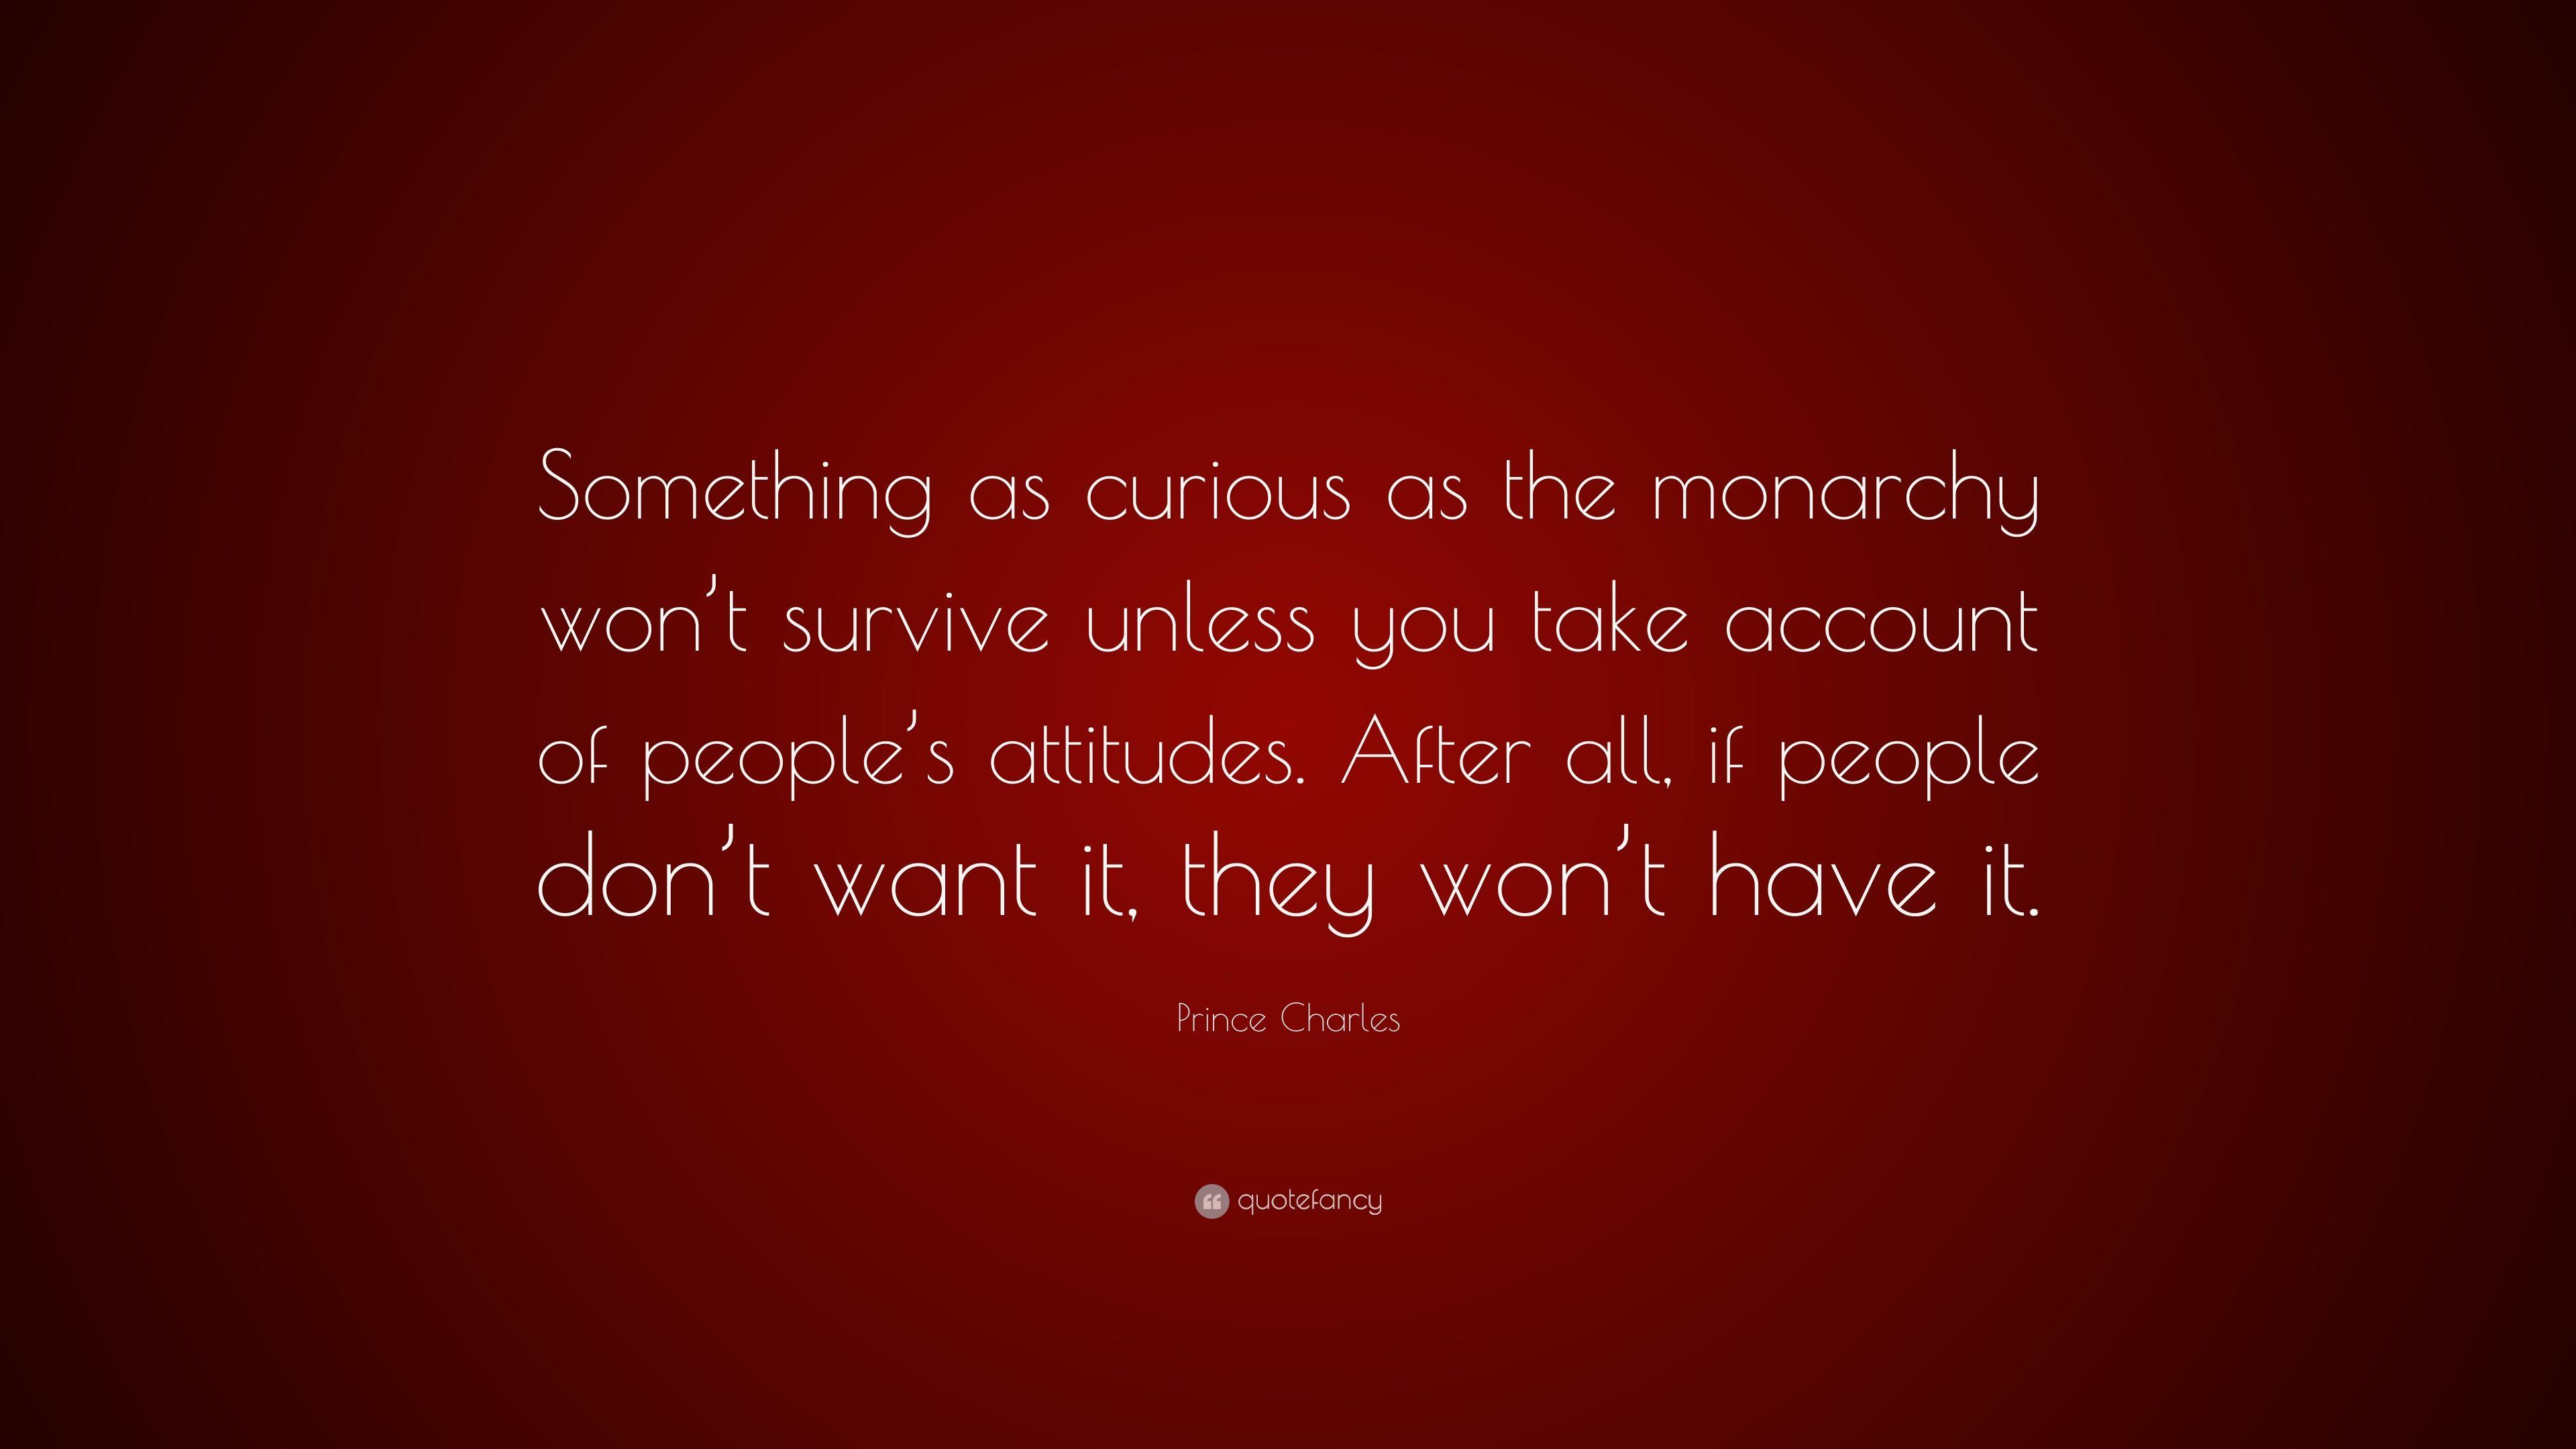 Prince Charles Quote: “Something as curious as the monarchy won't